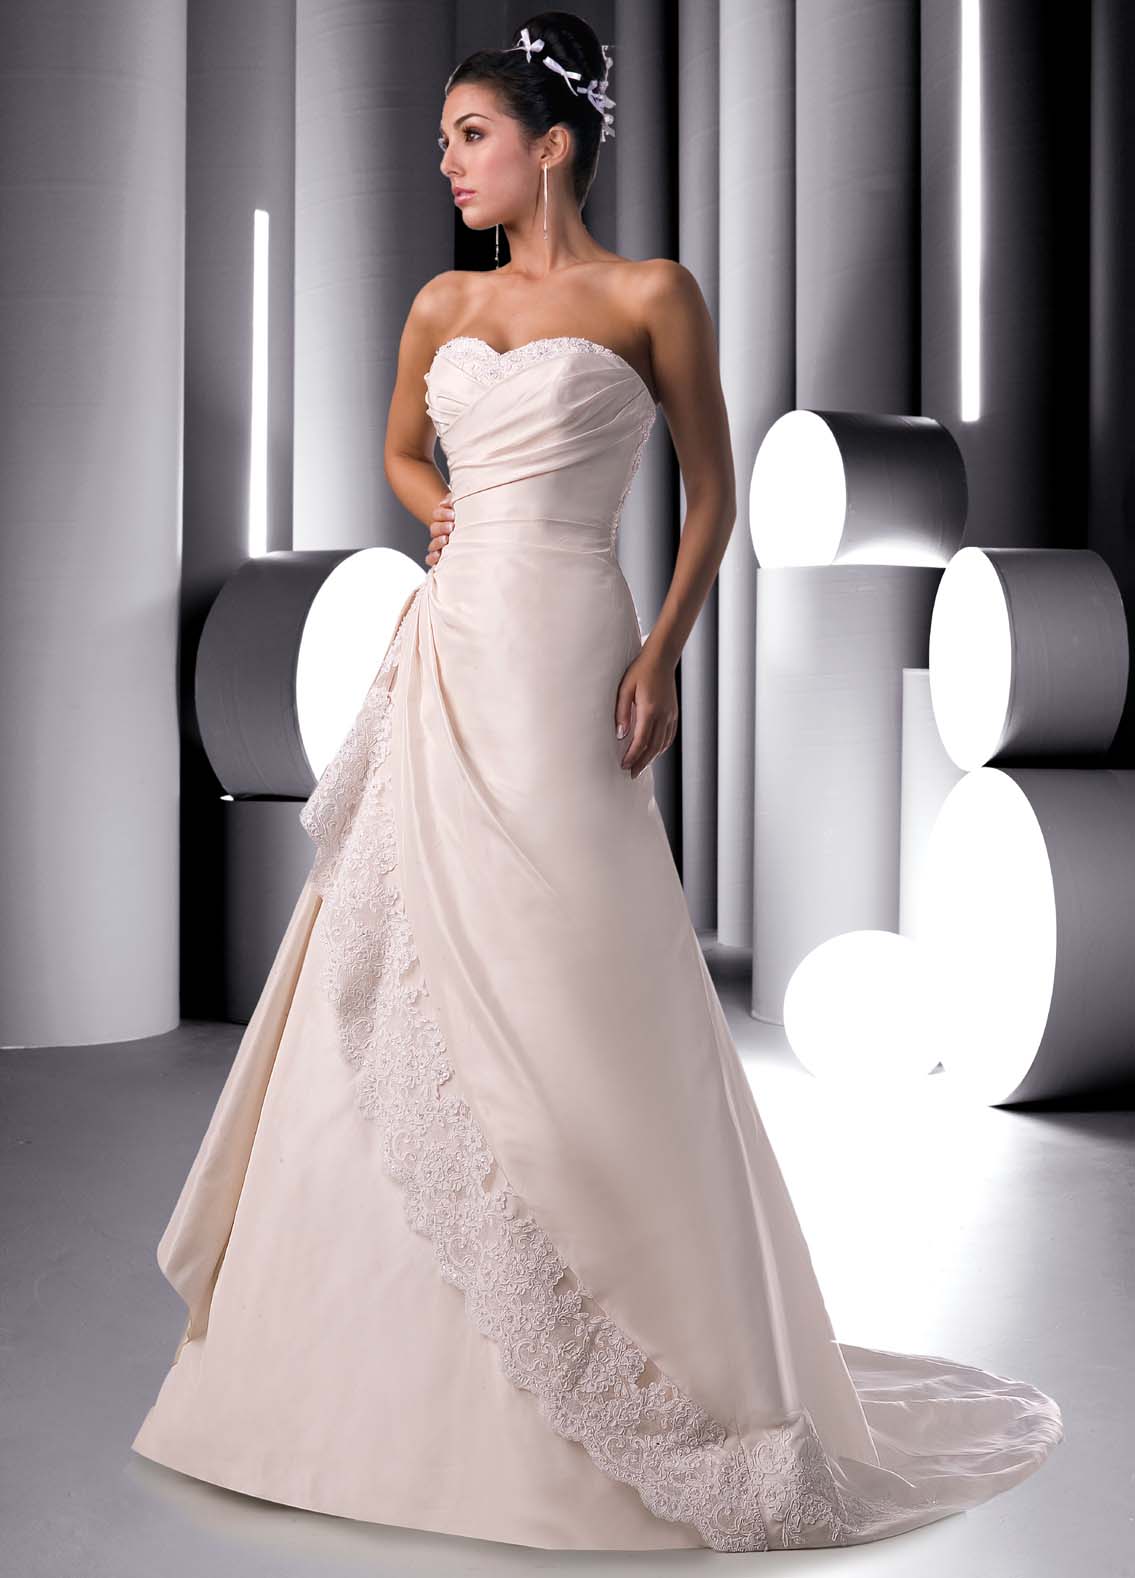 Kristen  Asymmetrical Low Back Fitted Wedding Gown  Iconic  Galia Lahav  Couture